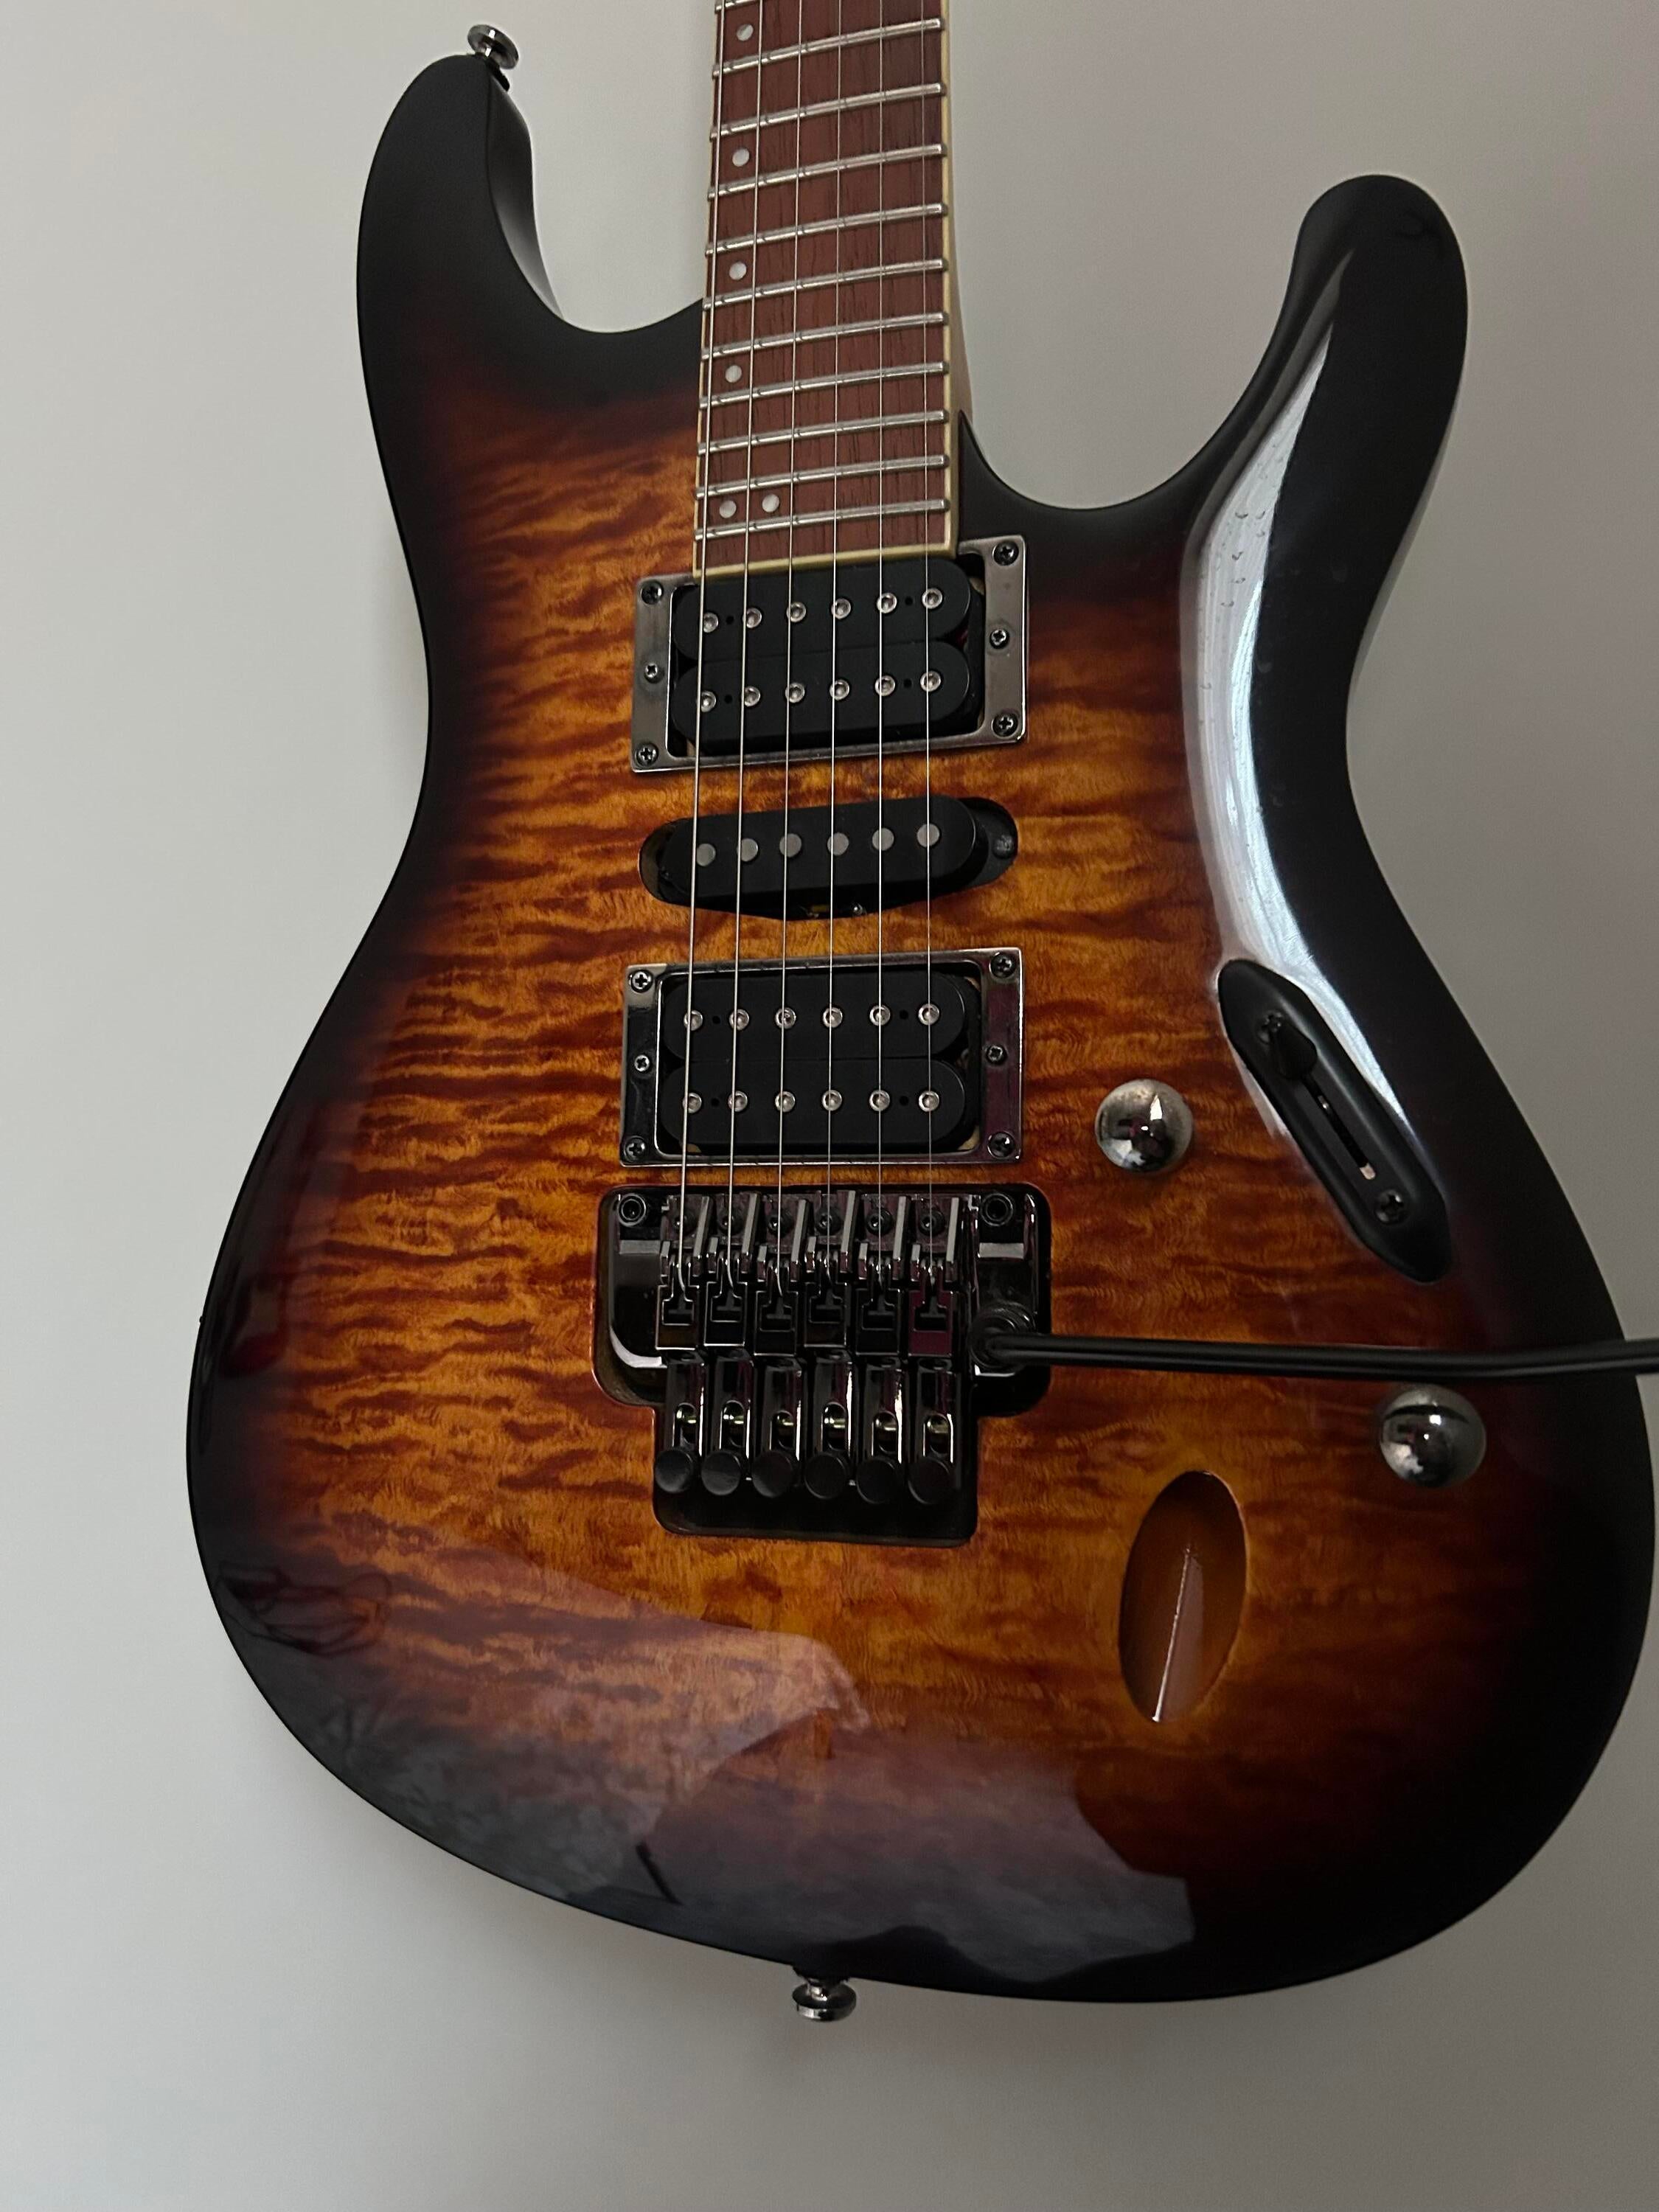 Exchange　Sweetwater's　Dragon　S670QM　Guitar　Electric　Gear　Used　Ibanez